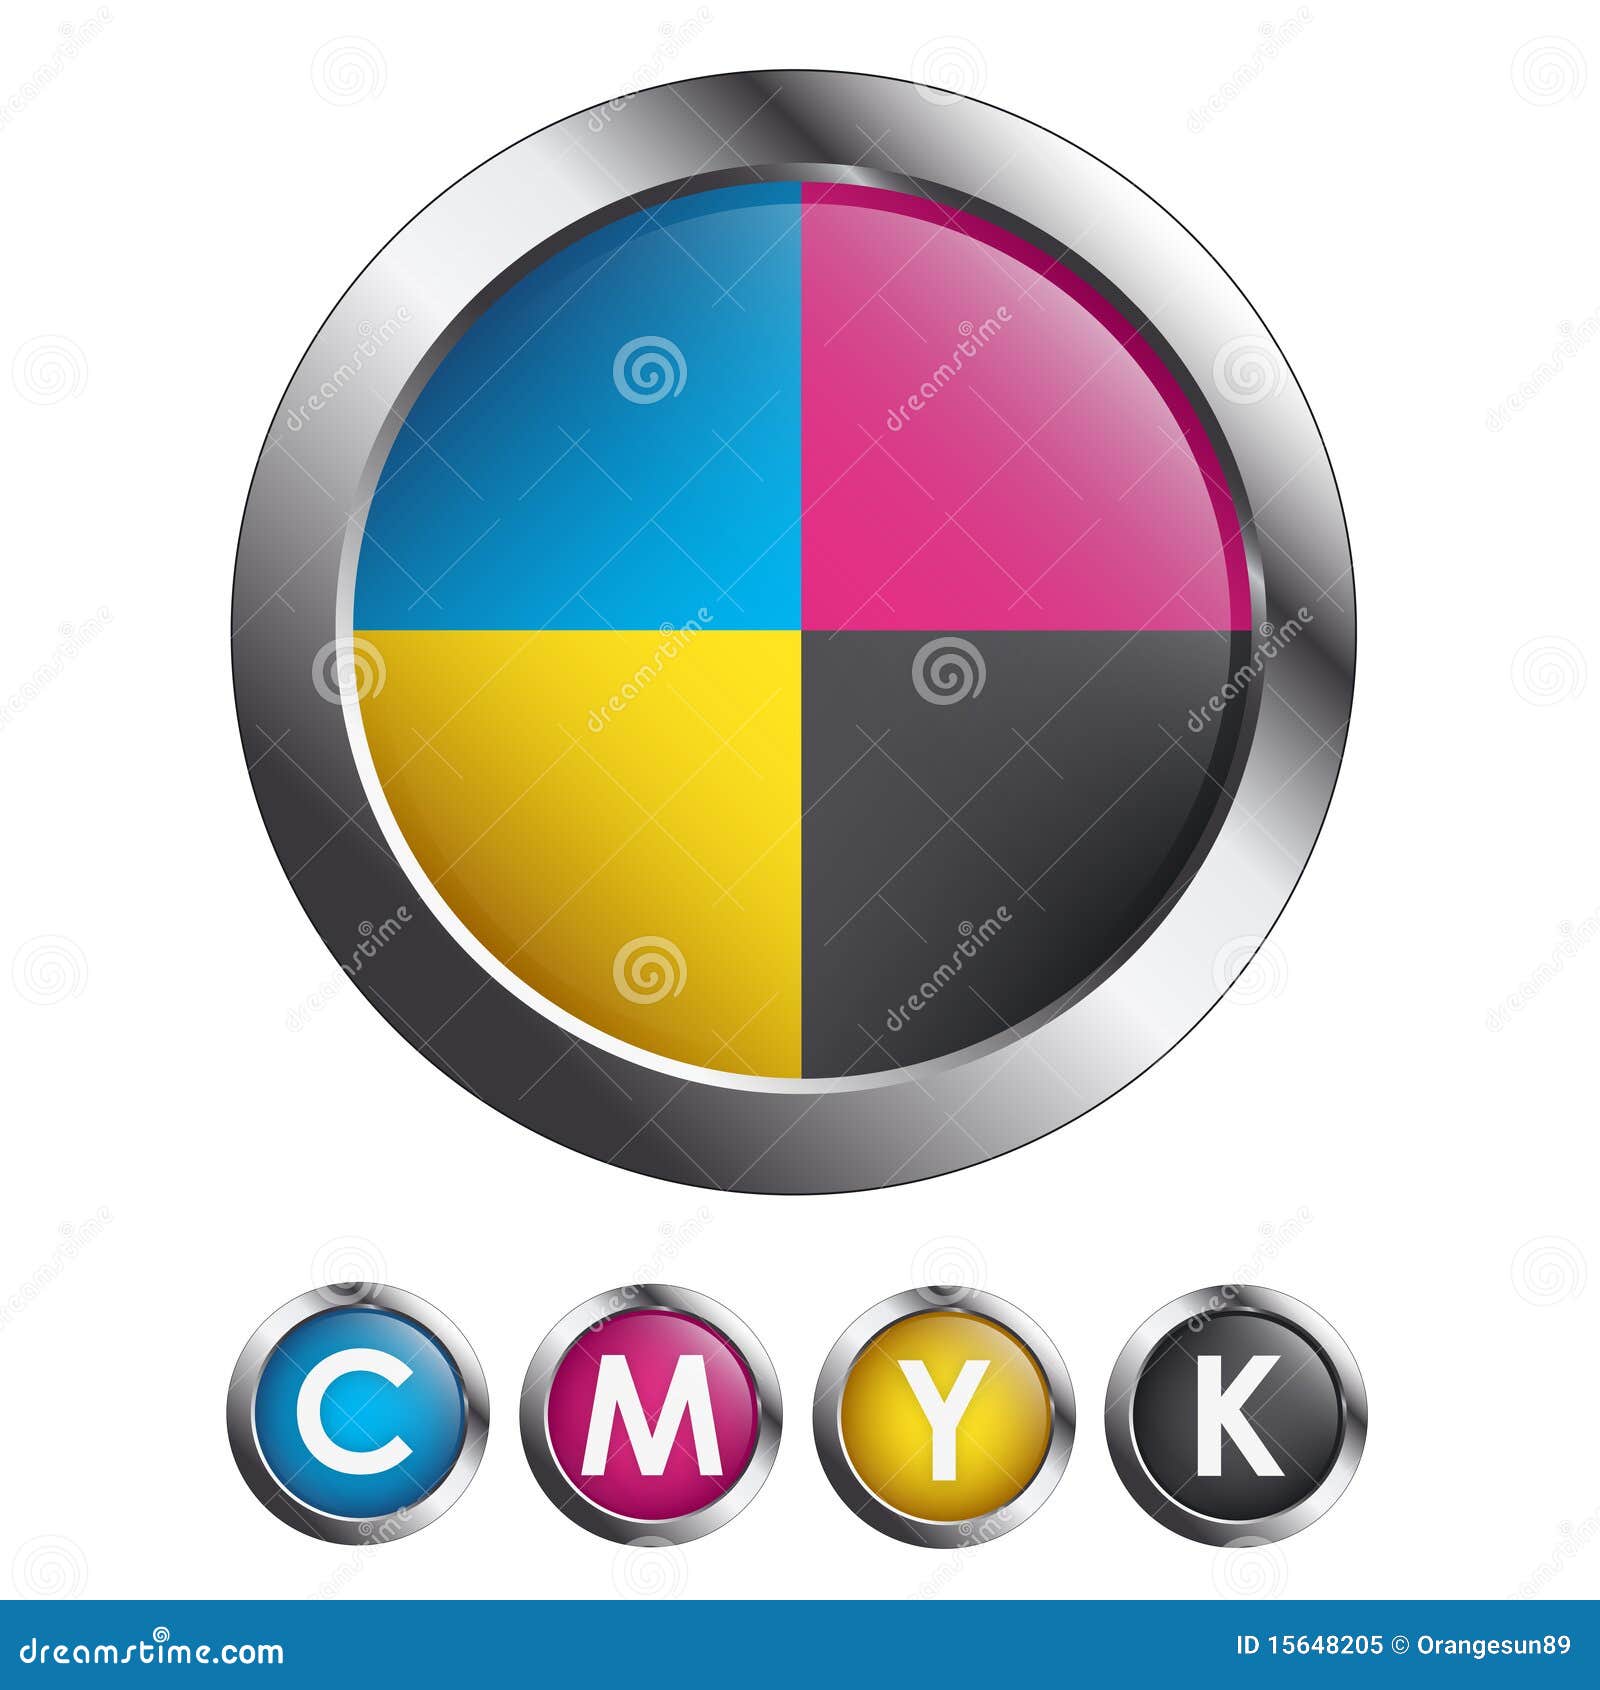 cmyk glossy round buttons